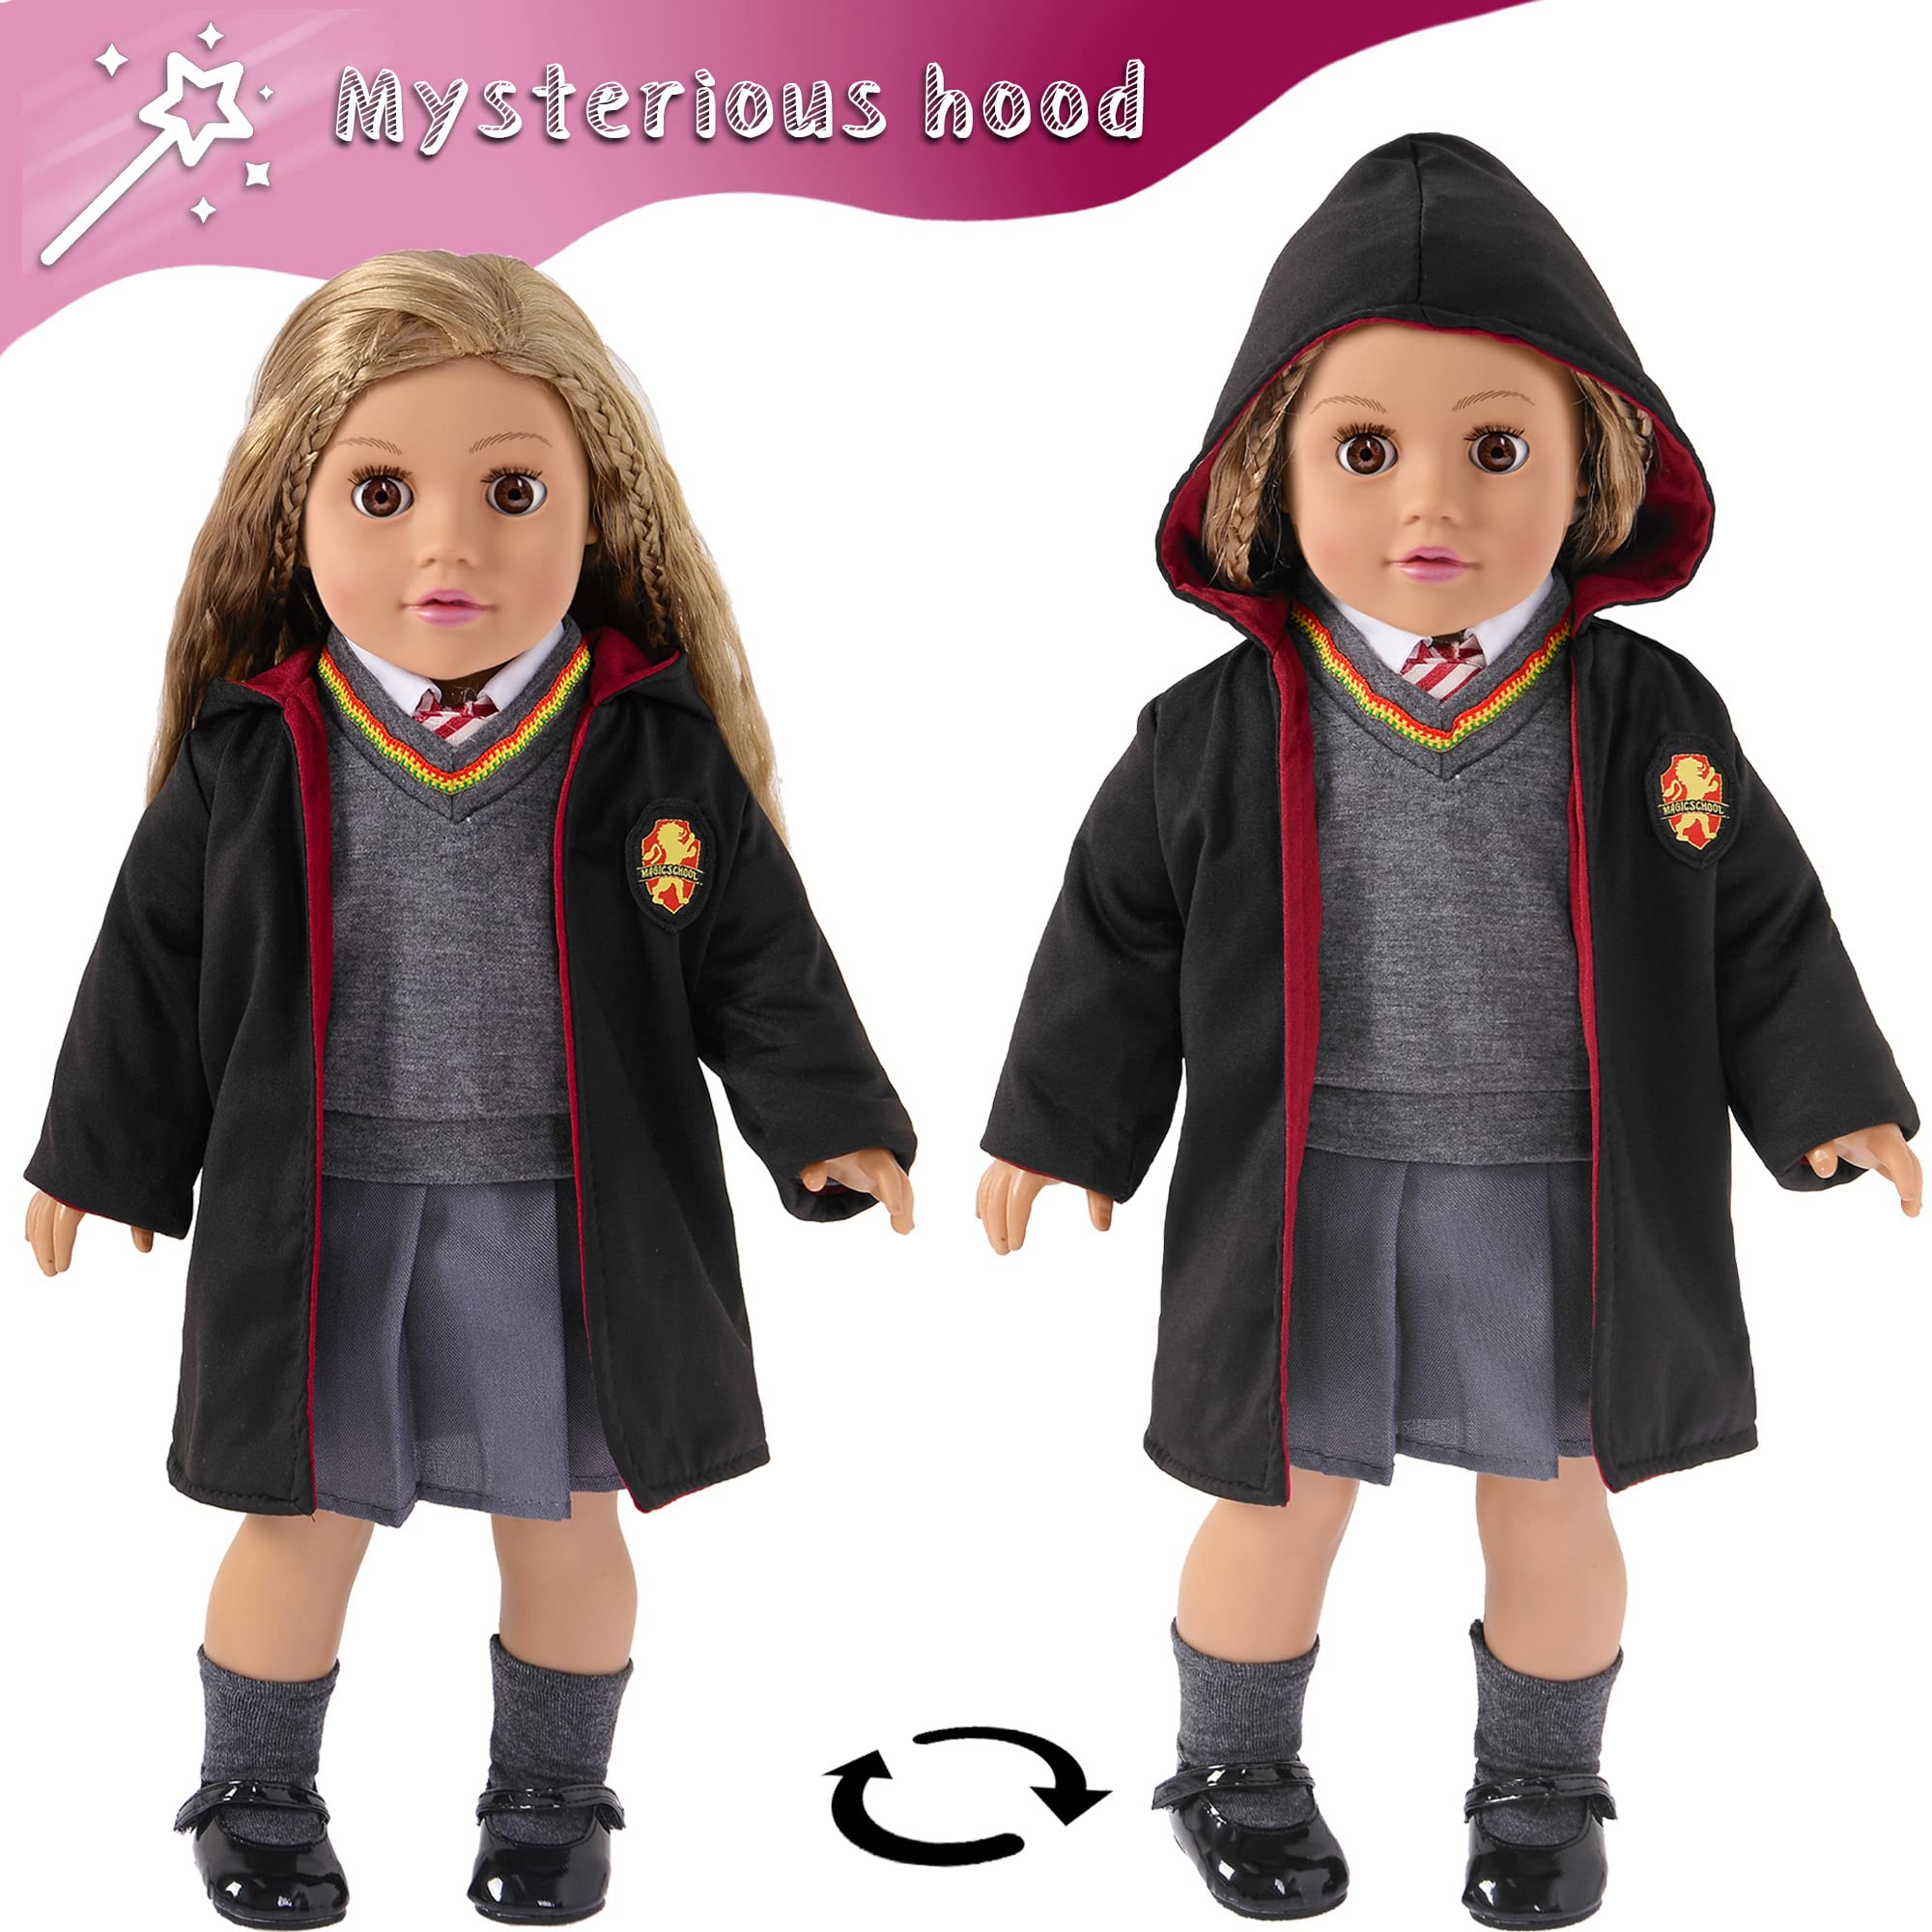 18 inch Dolls Magic School Uniform Inspired Costume Doll Clothes Accessories Set Include Outfit Shoes for Girls Gift (No Doll)